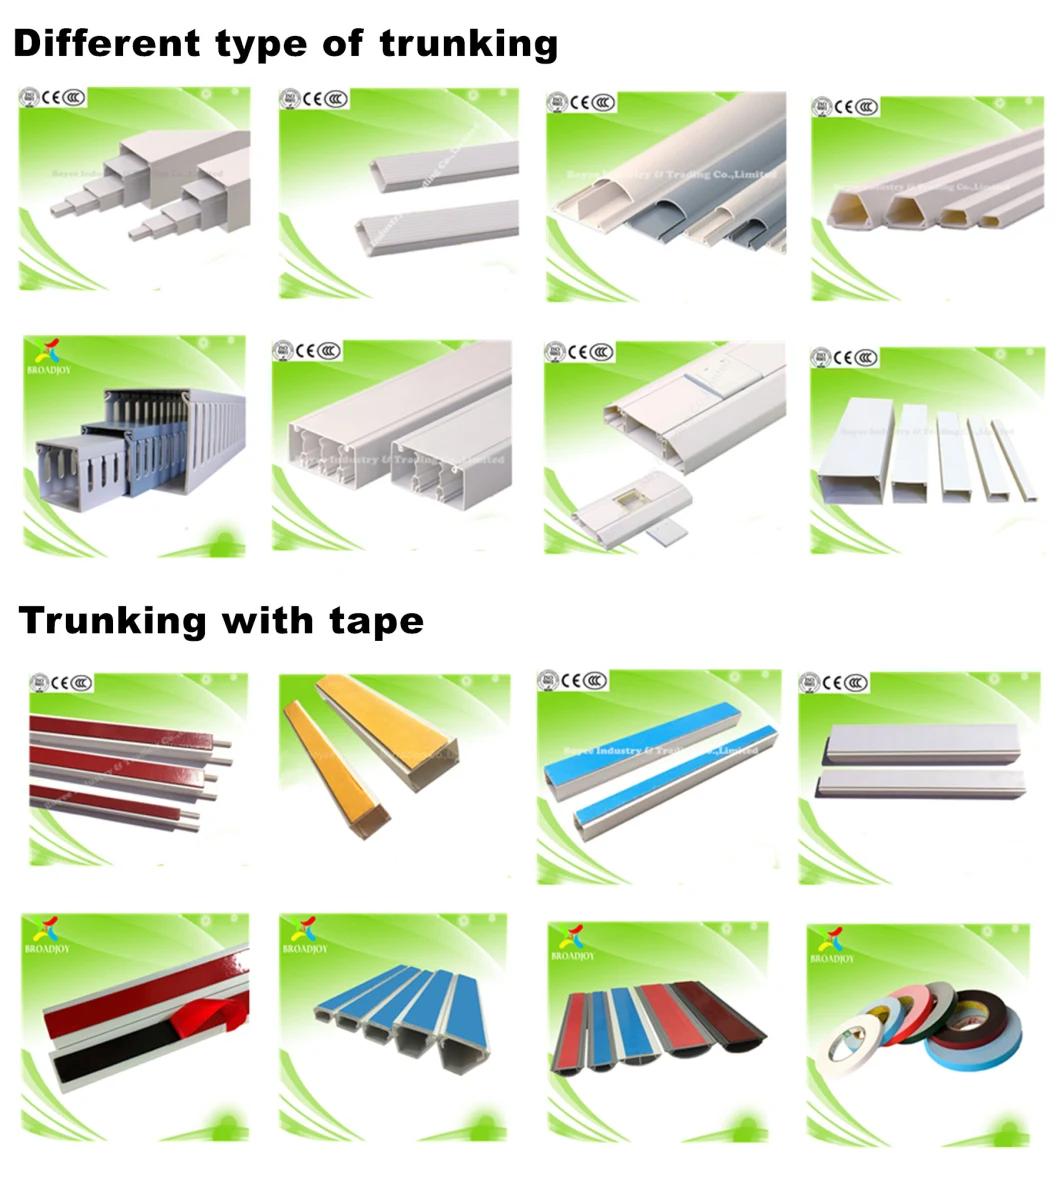 PVC Trunking with Sticker/Plastic Electrical Products Trunking with Glue/ PVC Trunking with Blue Adhesive / Trunking with Tape Electrical Cable Trunking